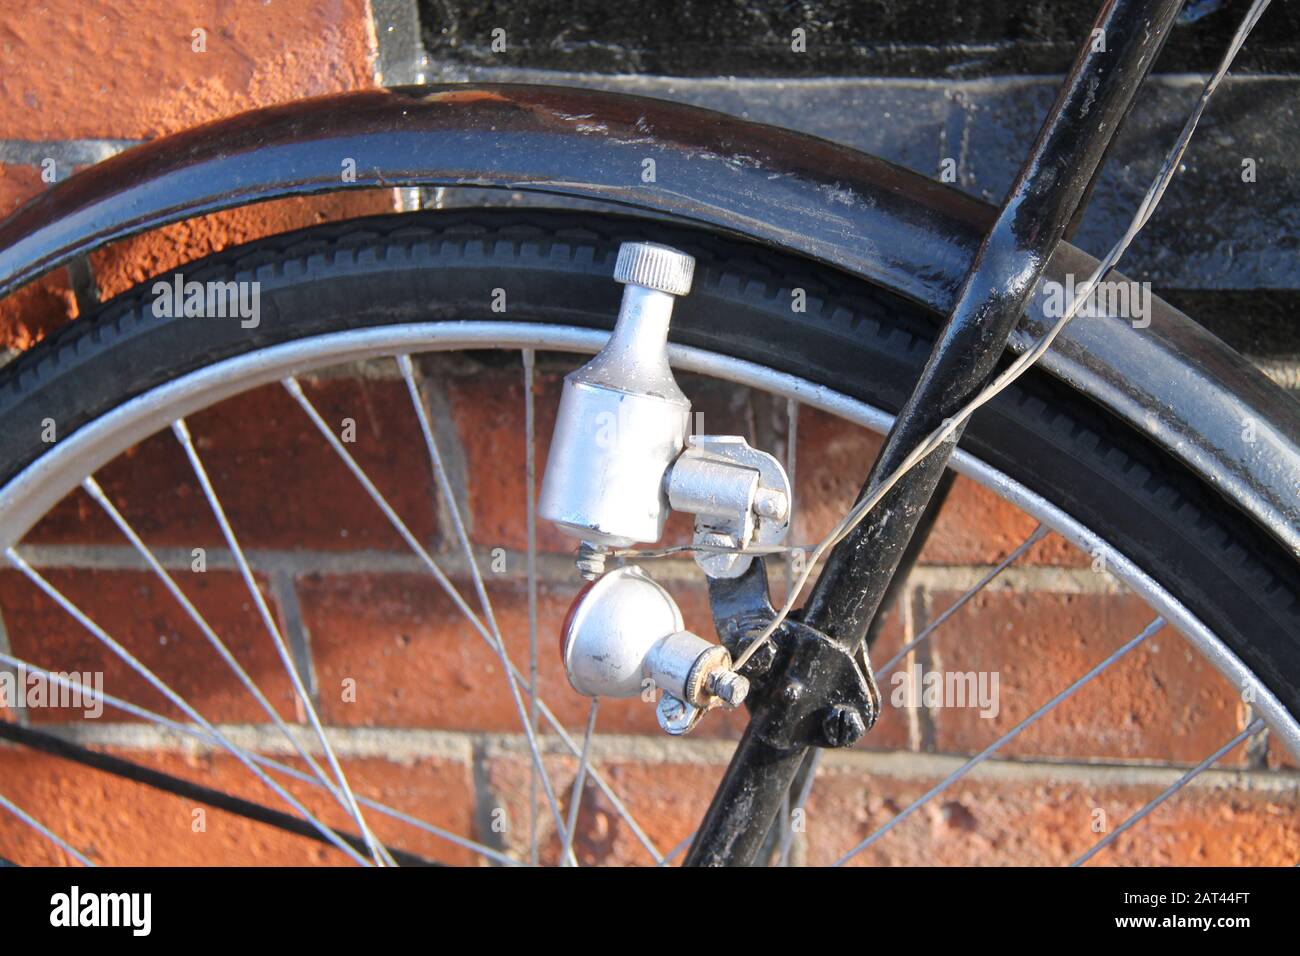 A Vintage Electric Generating Bicycle Dynamo Light Unit. Stock Photo